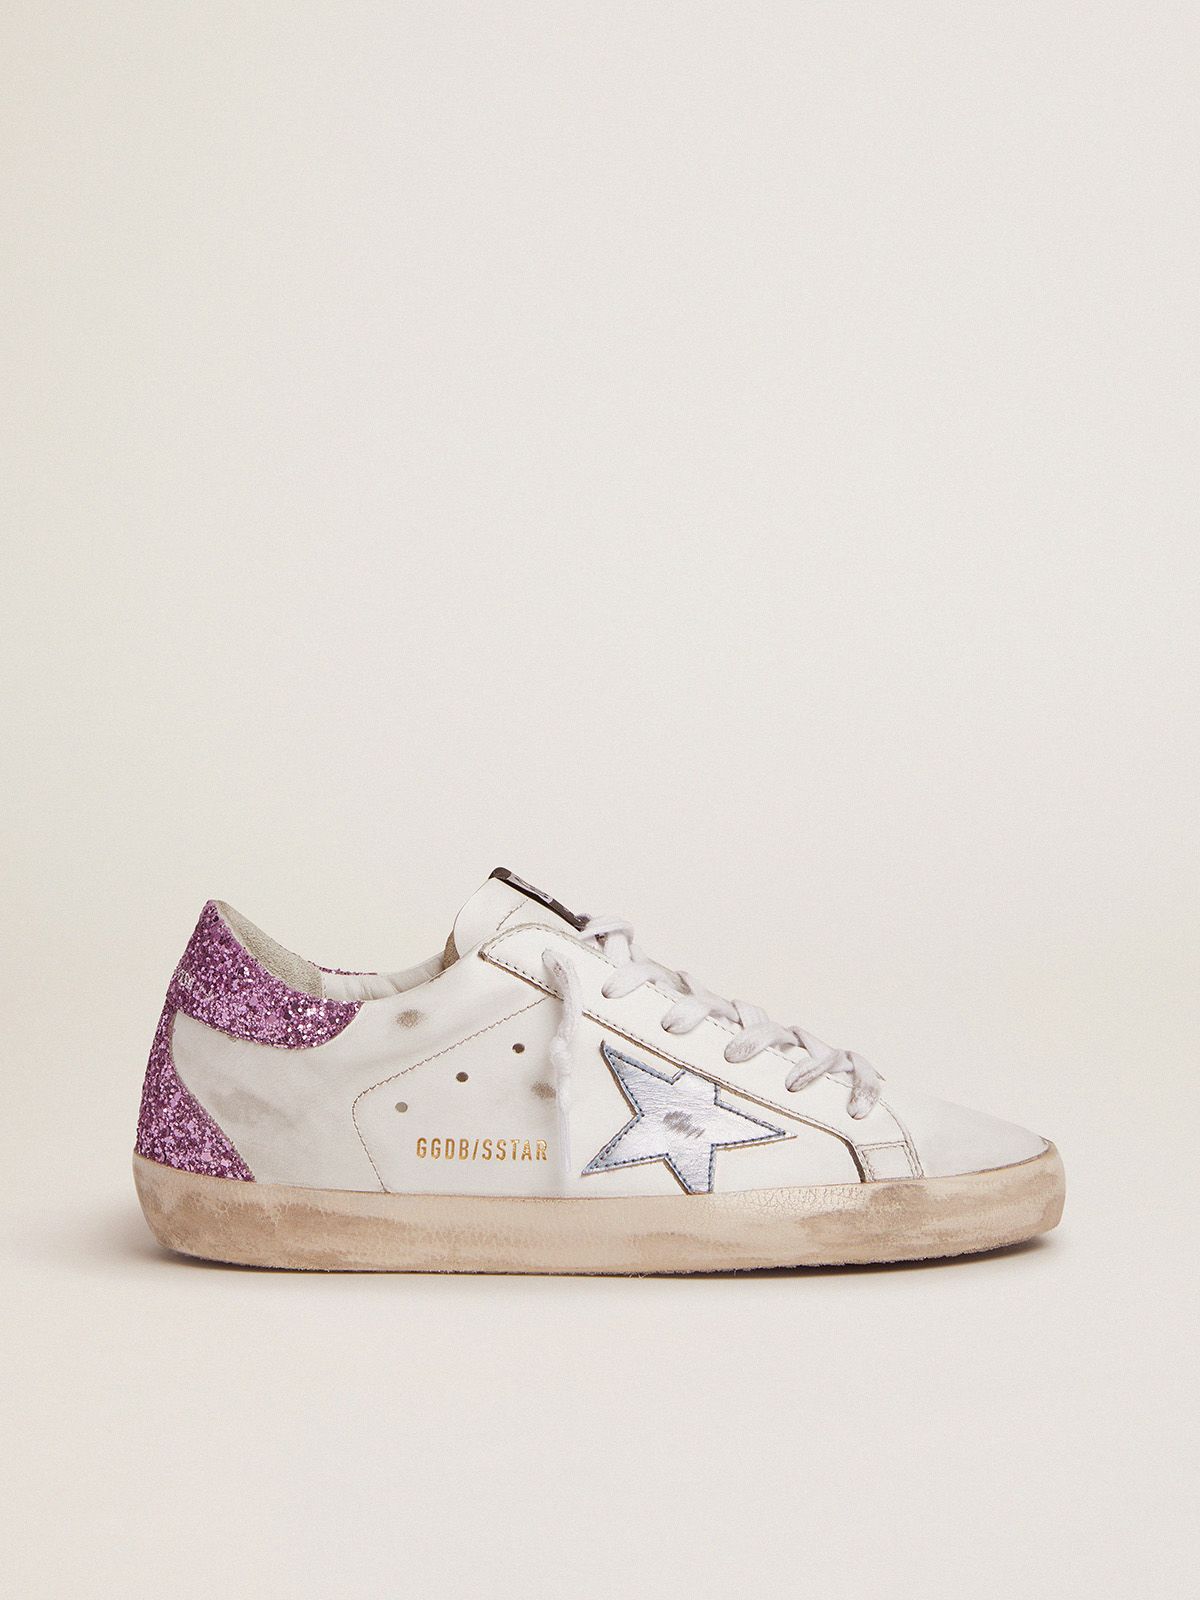 golden goose metallic star heel light-blue Super-Star with lavender tab glitter and sneakers leather